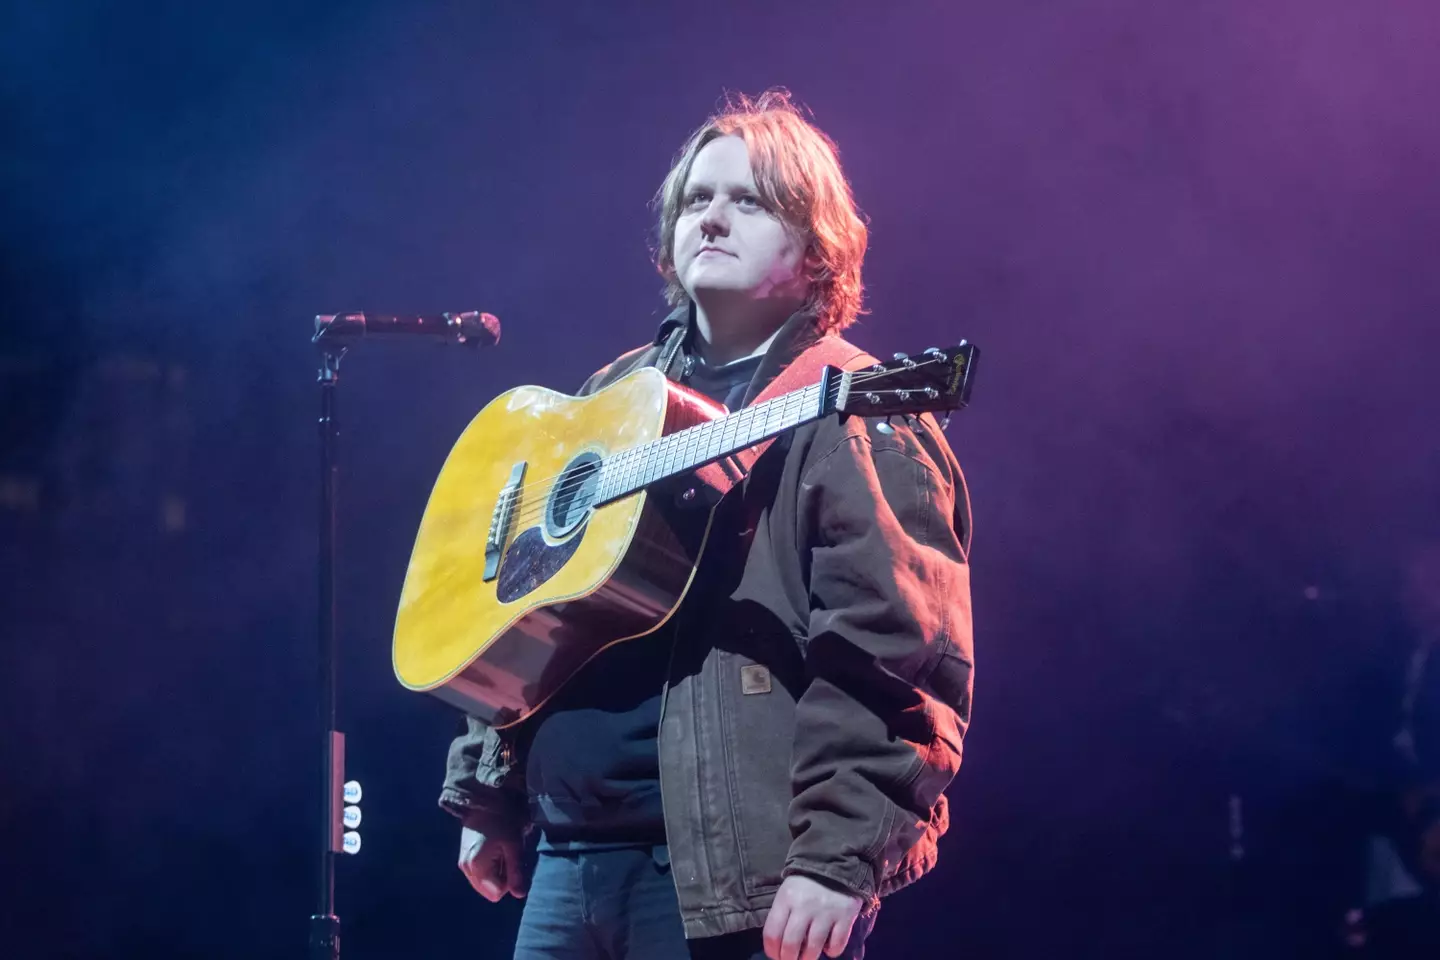 Lewis Capaldi has cancelled all the gigs he was set to perform until Glastonbury later this month.